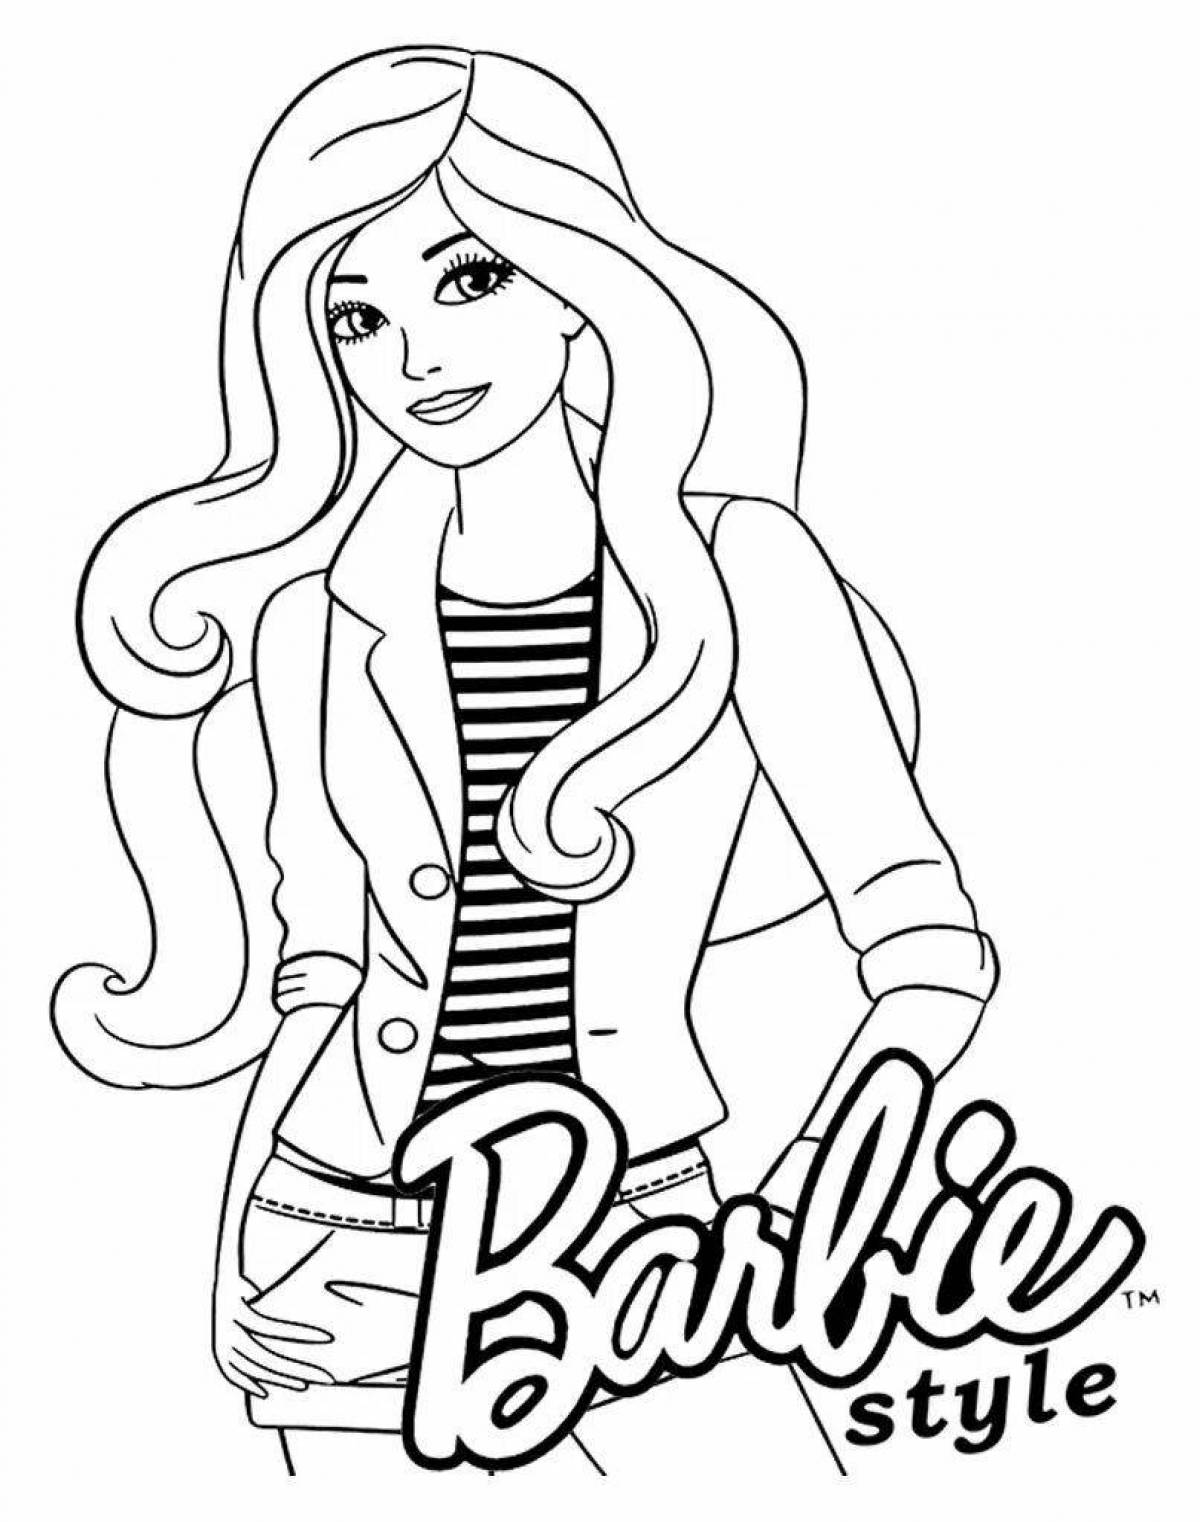 Wonderful barbie coloring book for kids 5-6 years old